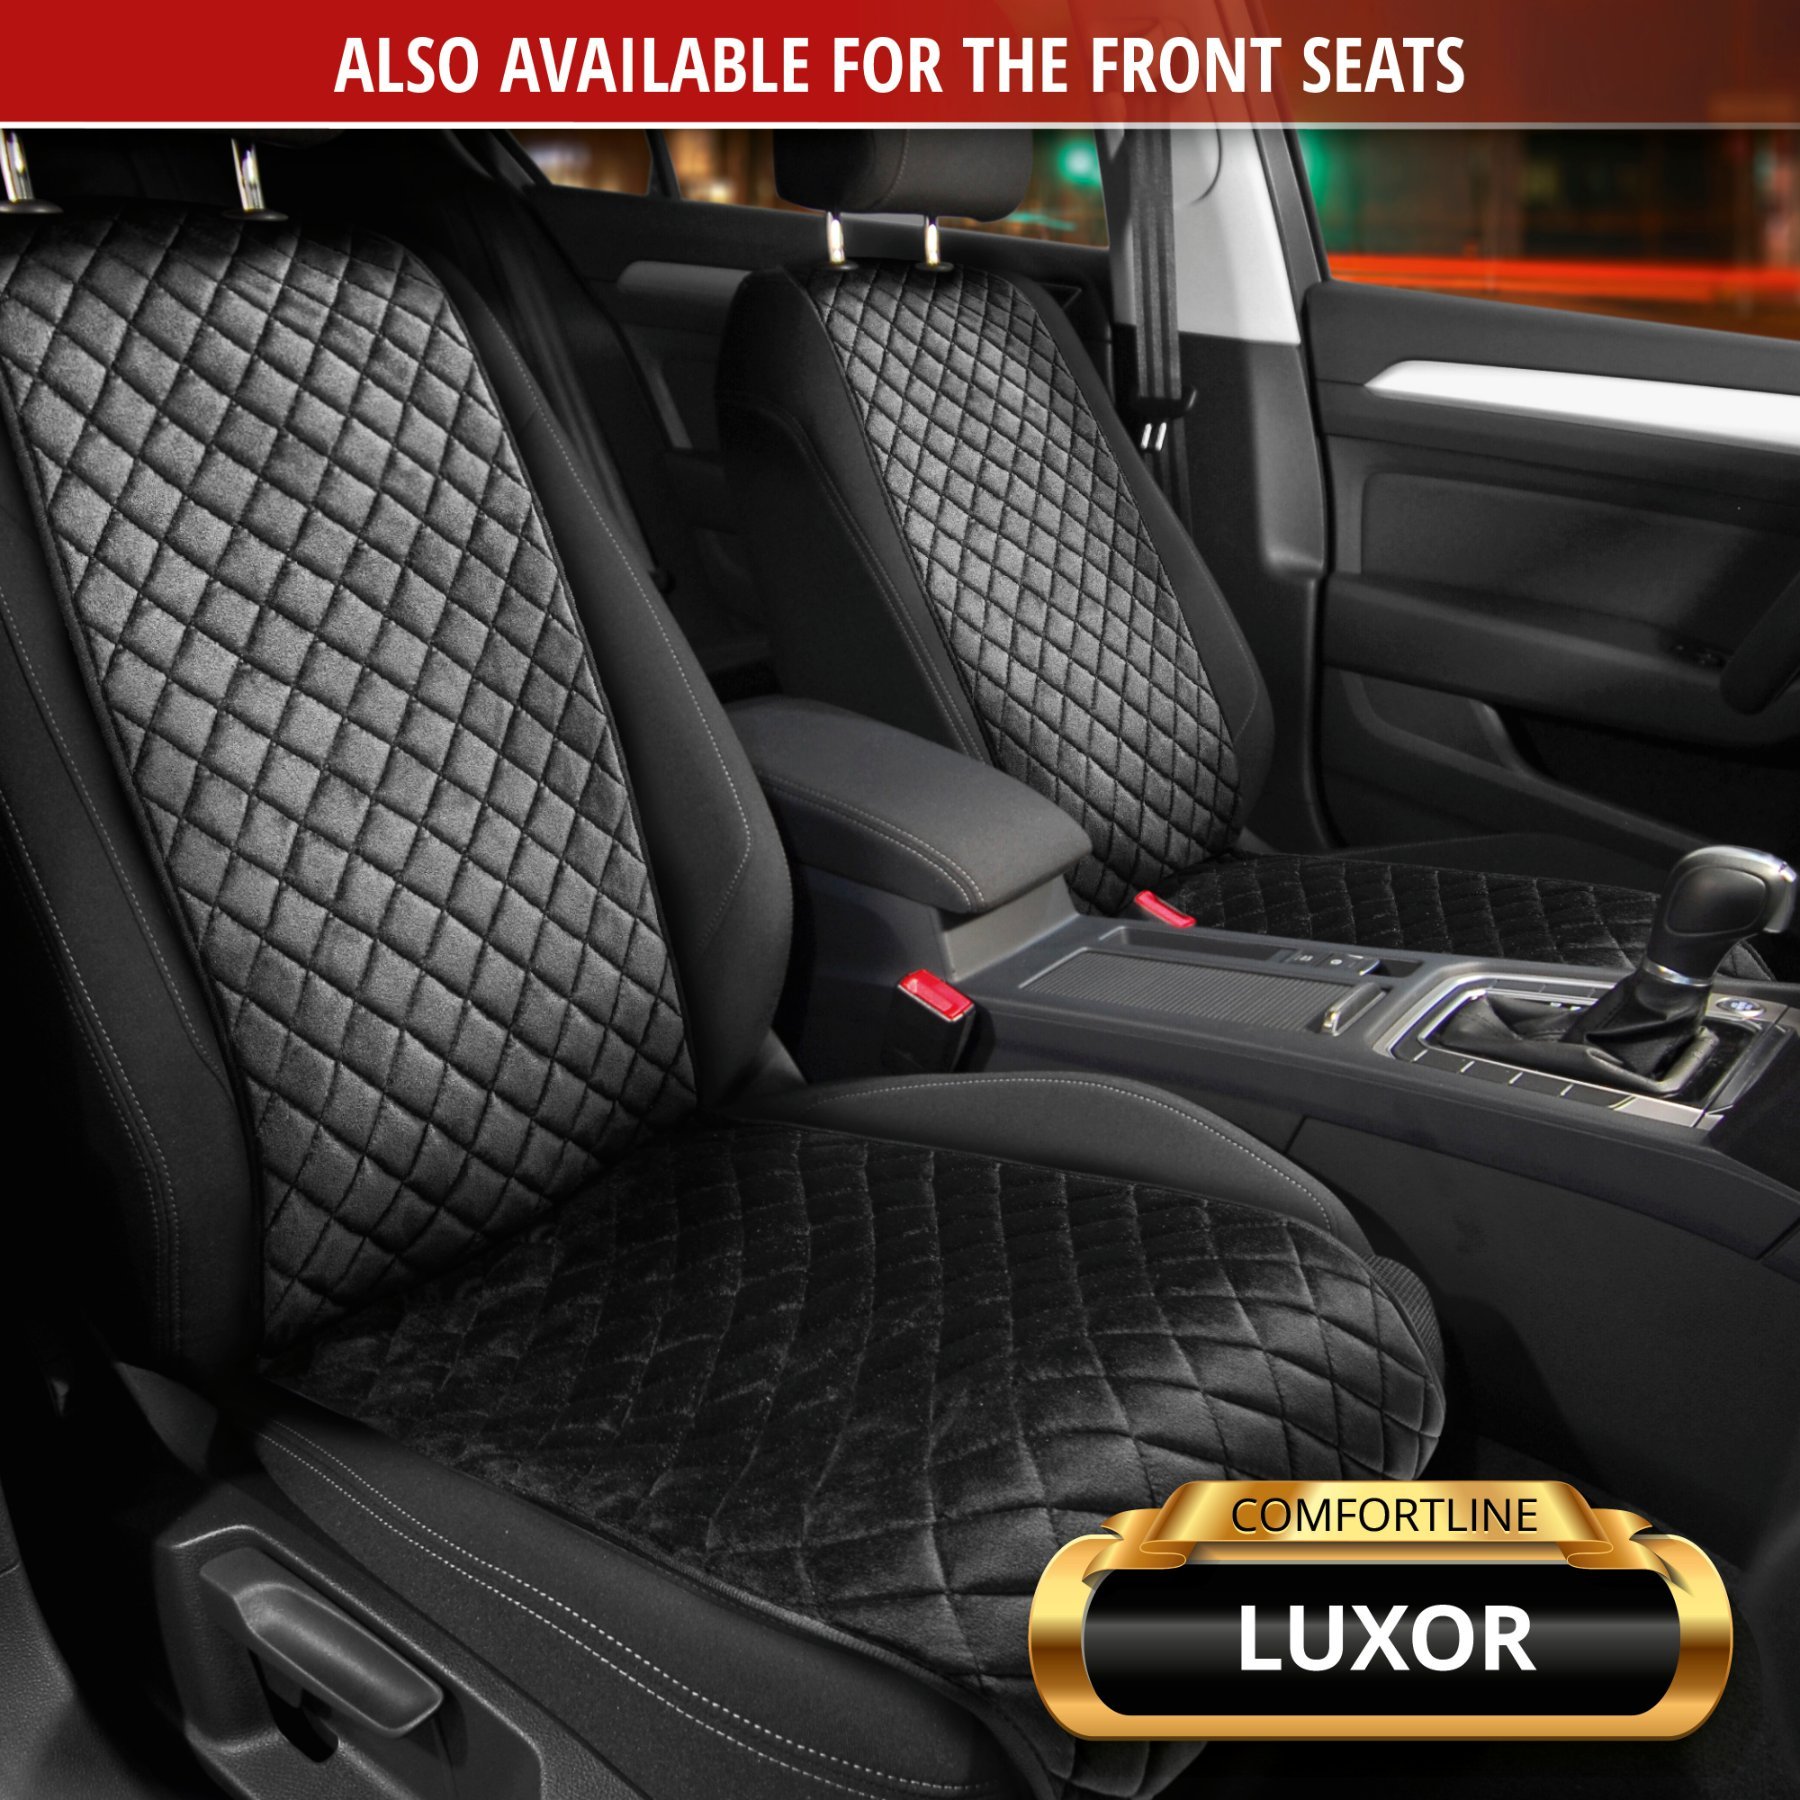 Seat cover Comfortline Luxor, 1 rear seat cover